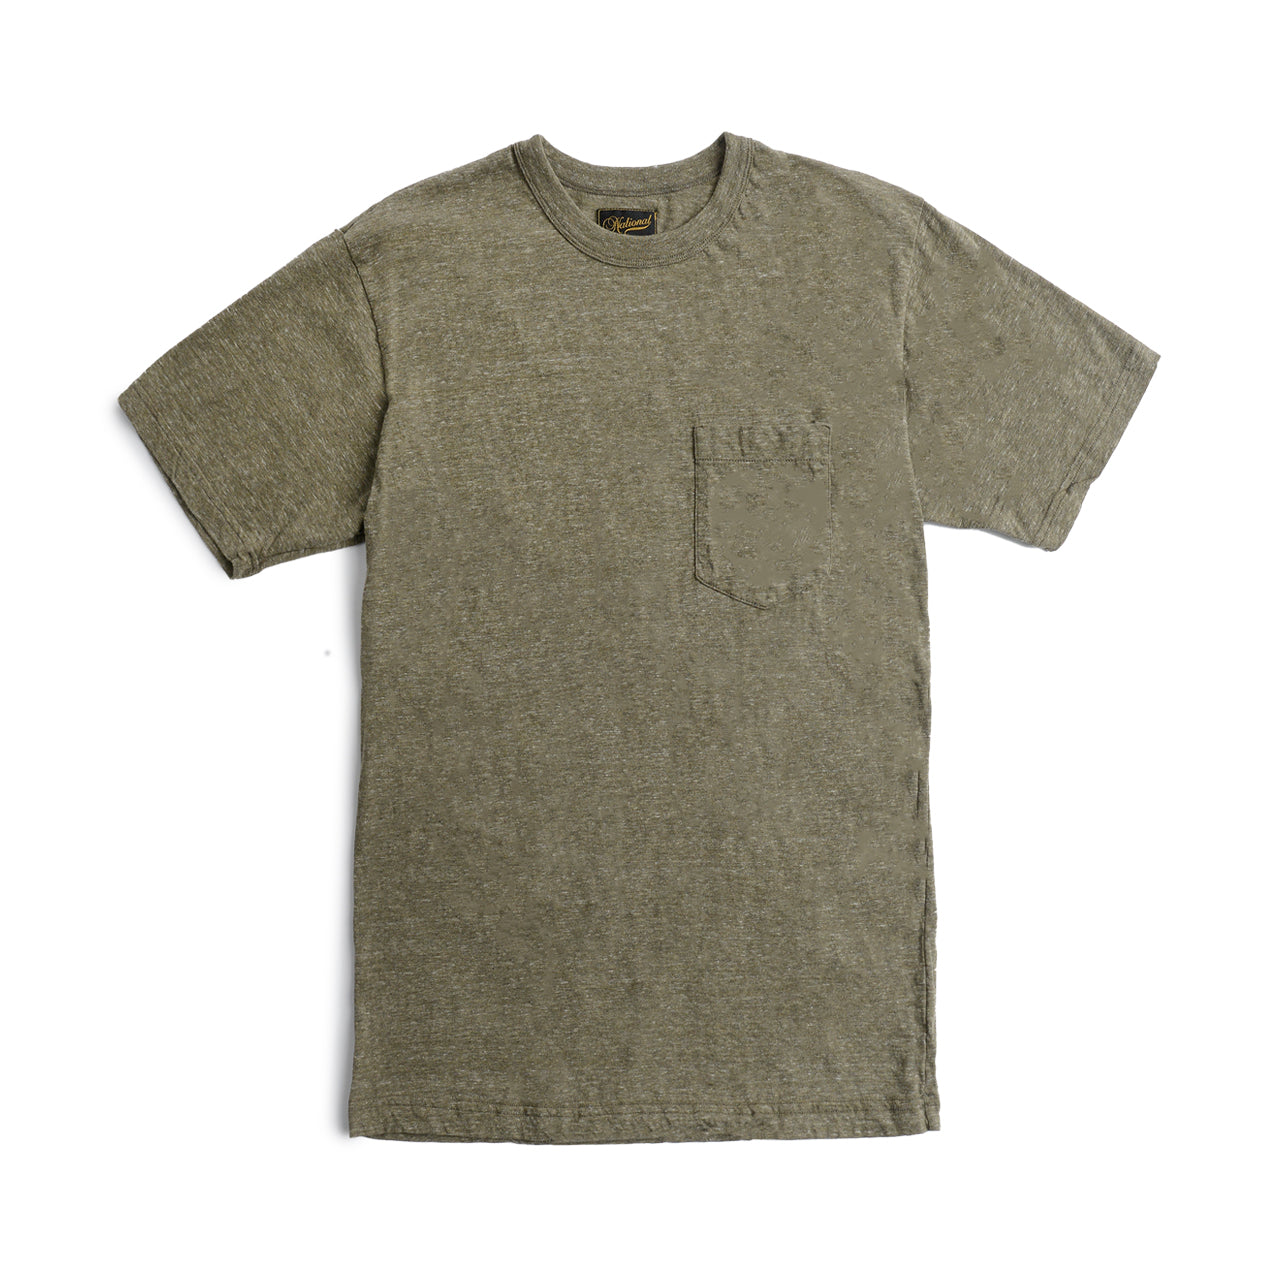 National Athletic Goods Pocket Tee